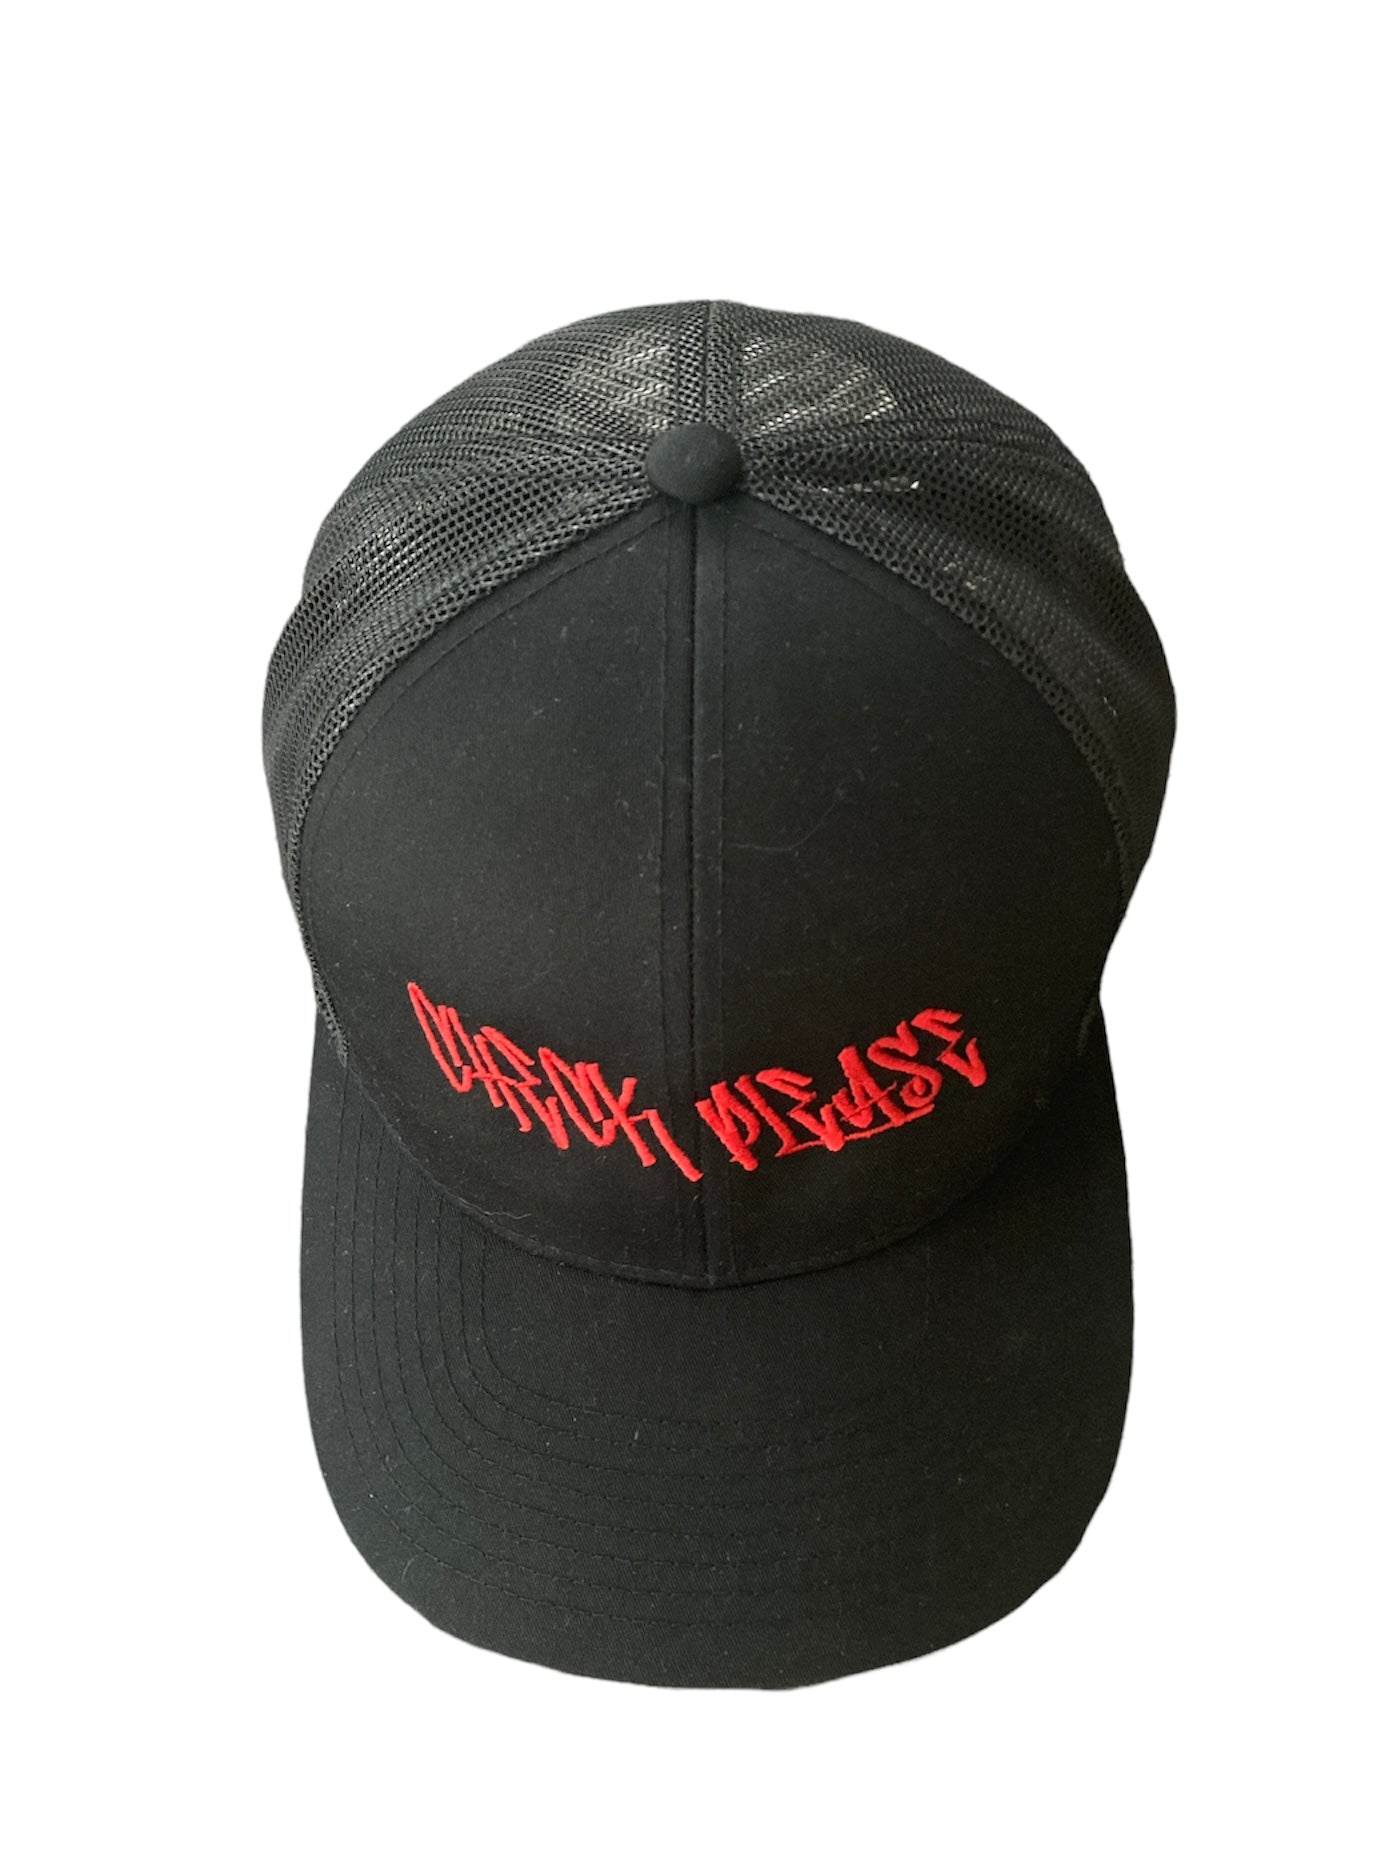 Check Please Clothing embroidered hat